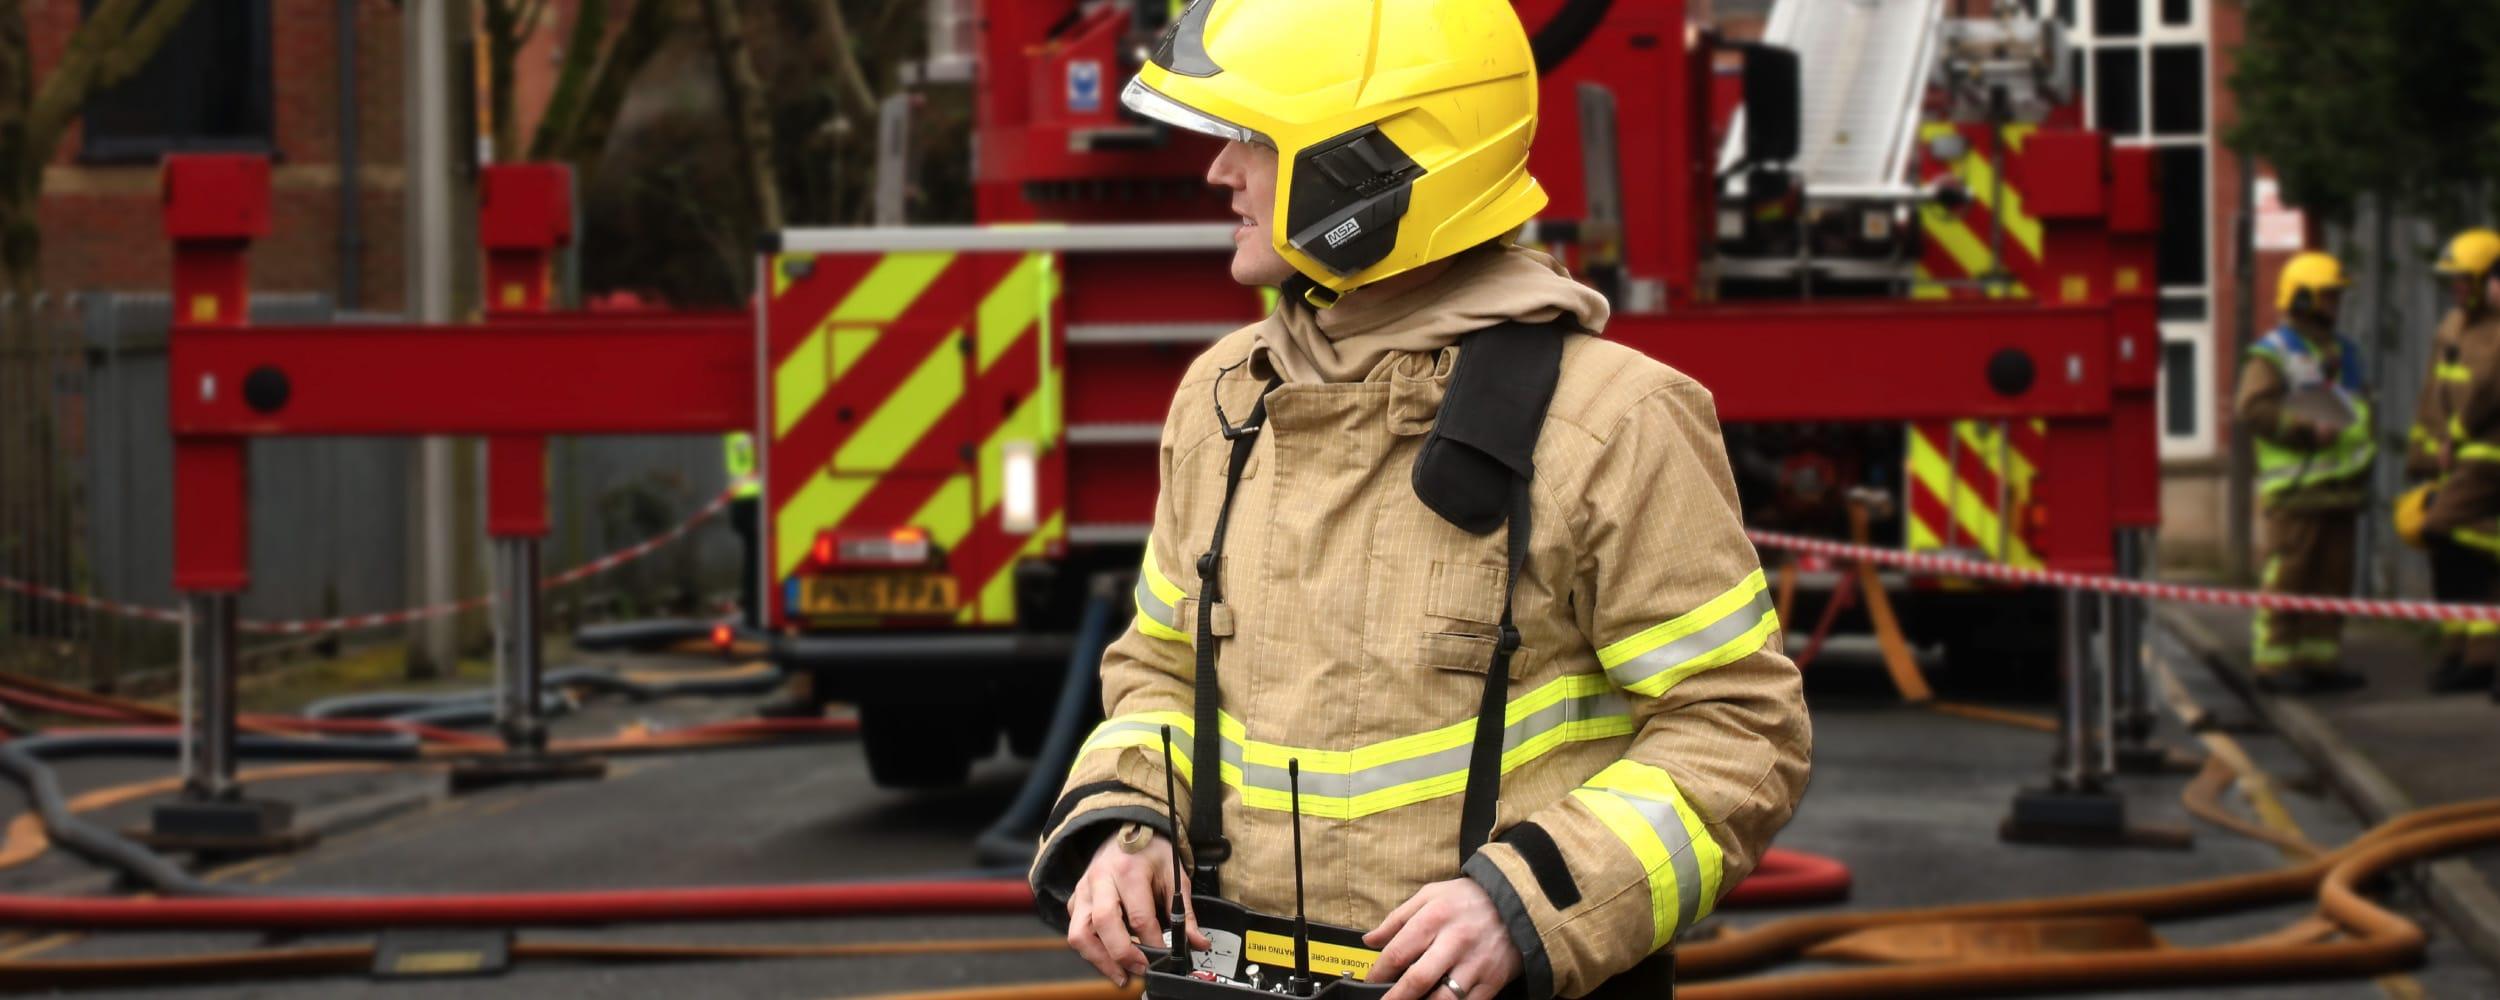 Image of firefighter in fire kit in front of an appliance looking into the distance